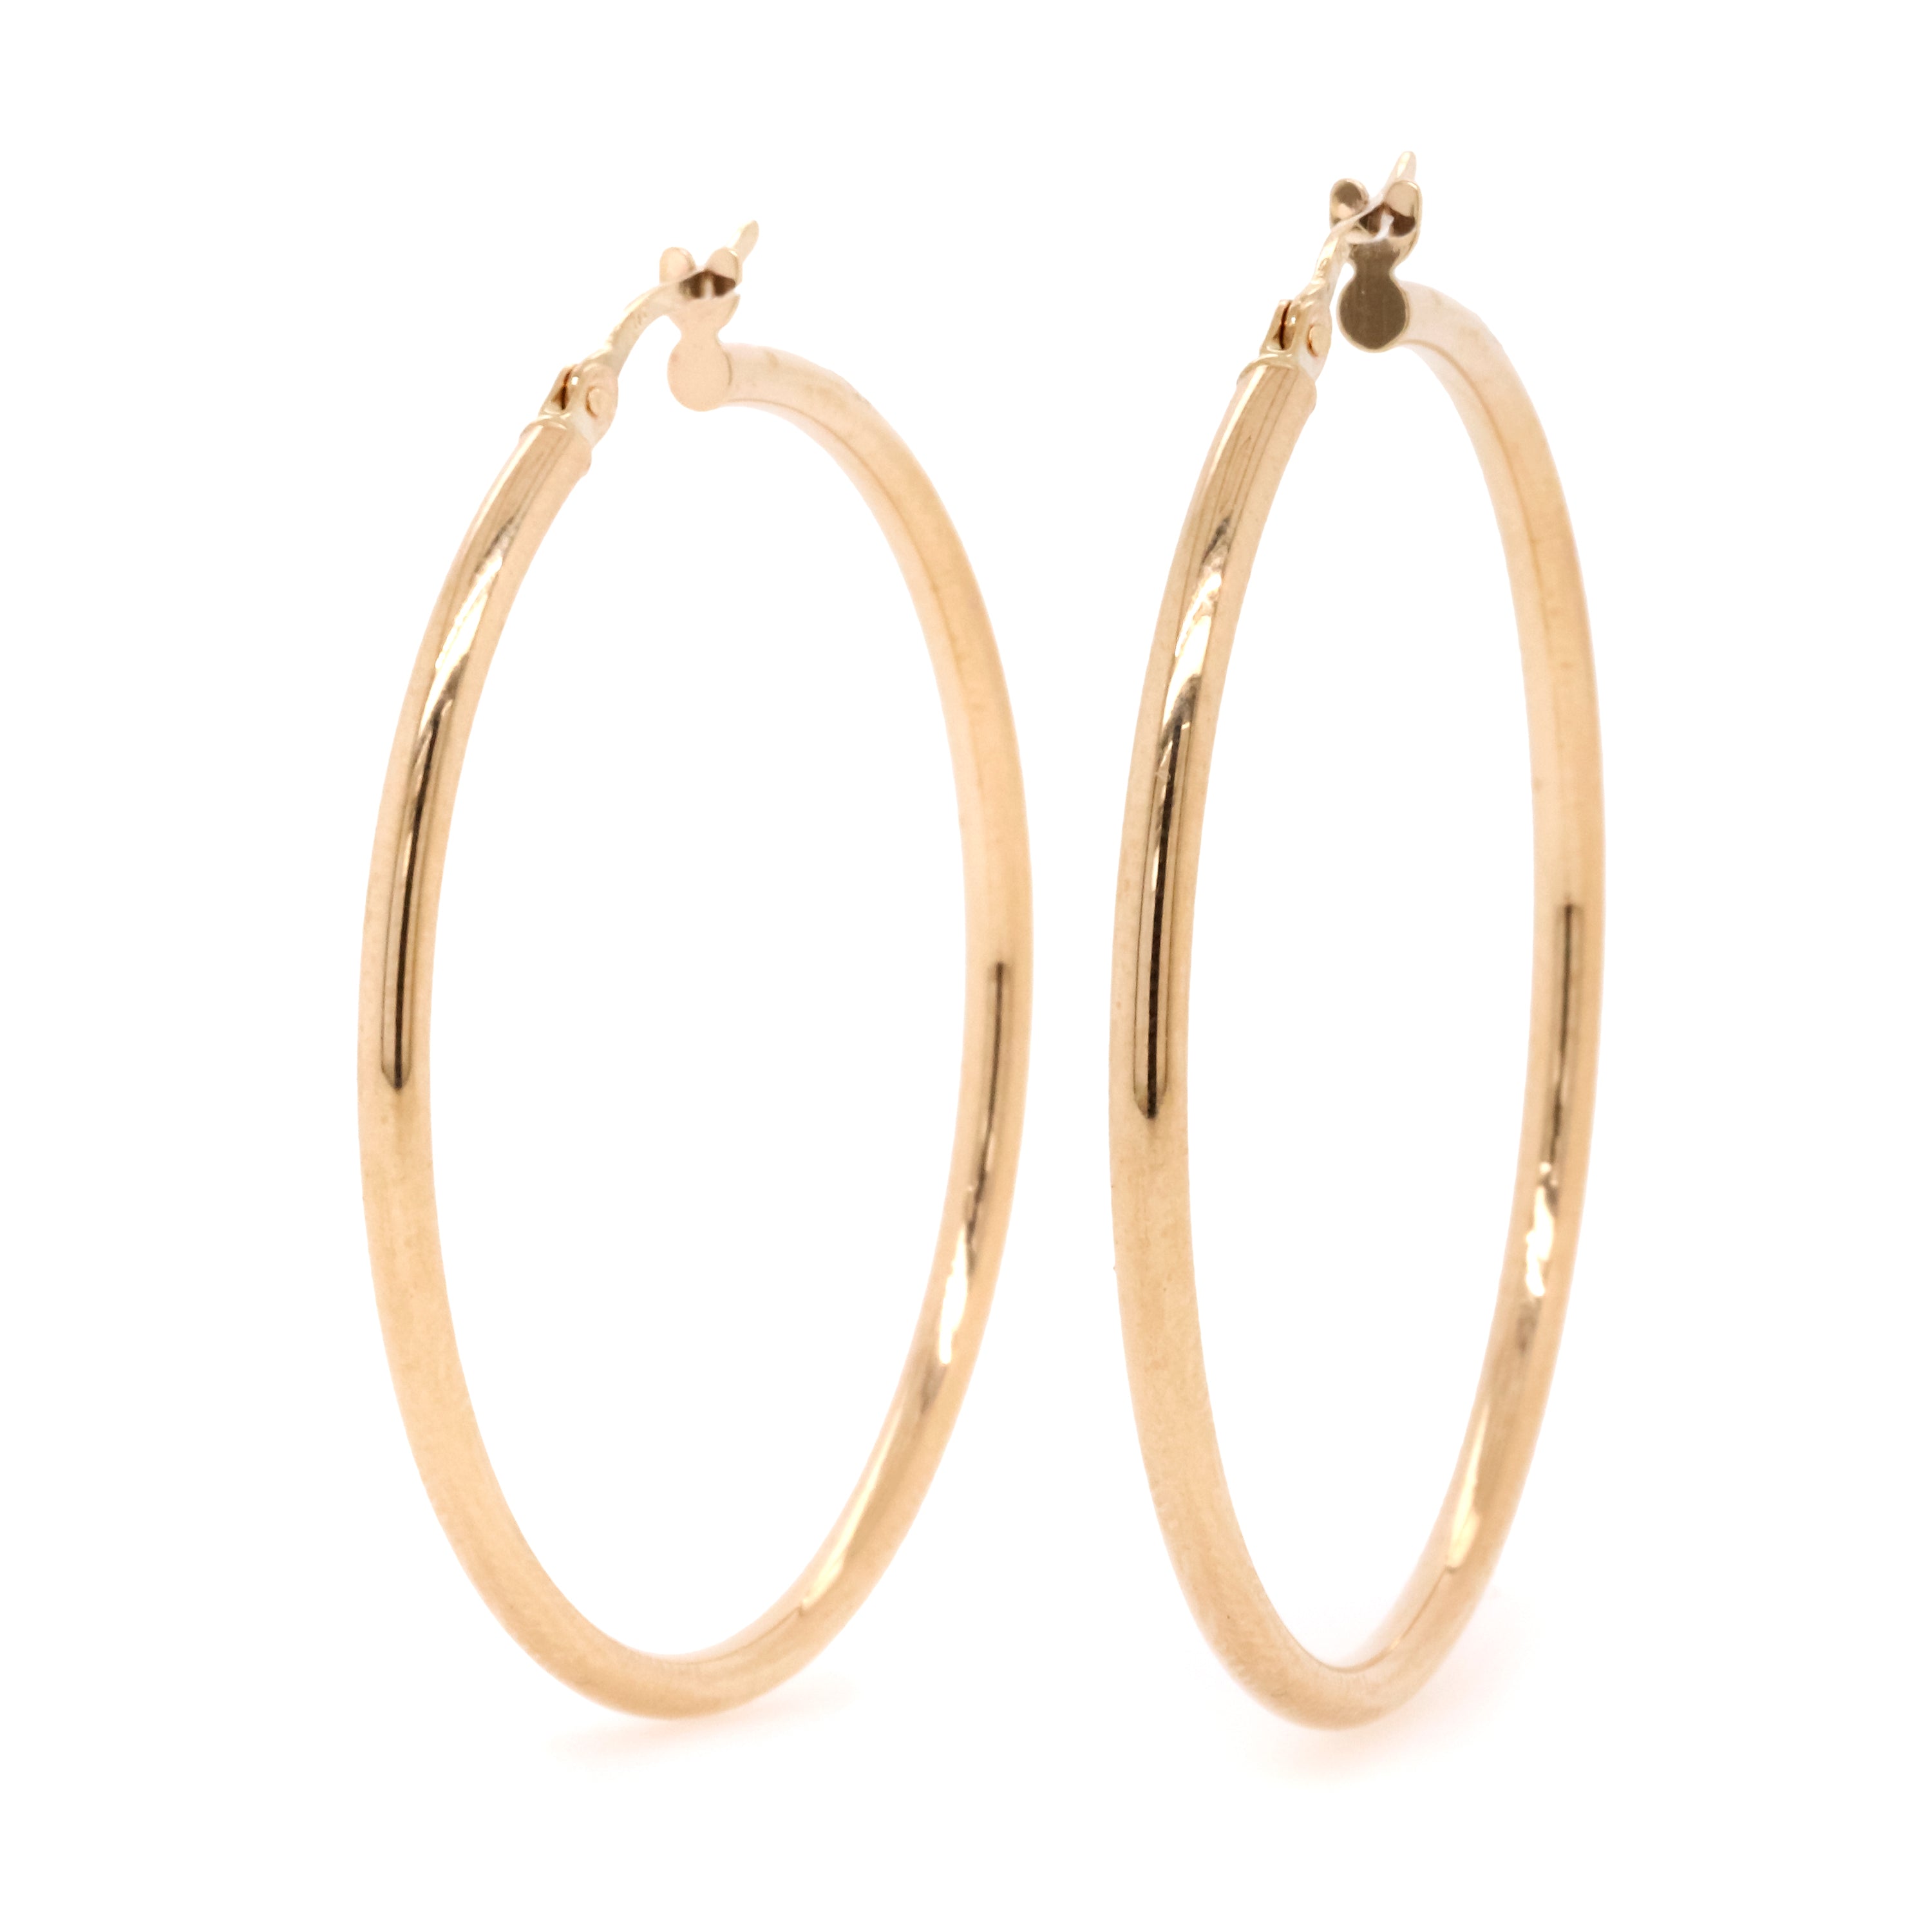 Argos Product Support for Revere 9ct Gold Capped Hoop Earrings (209/8869)